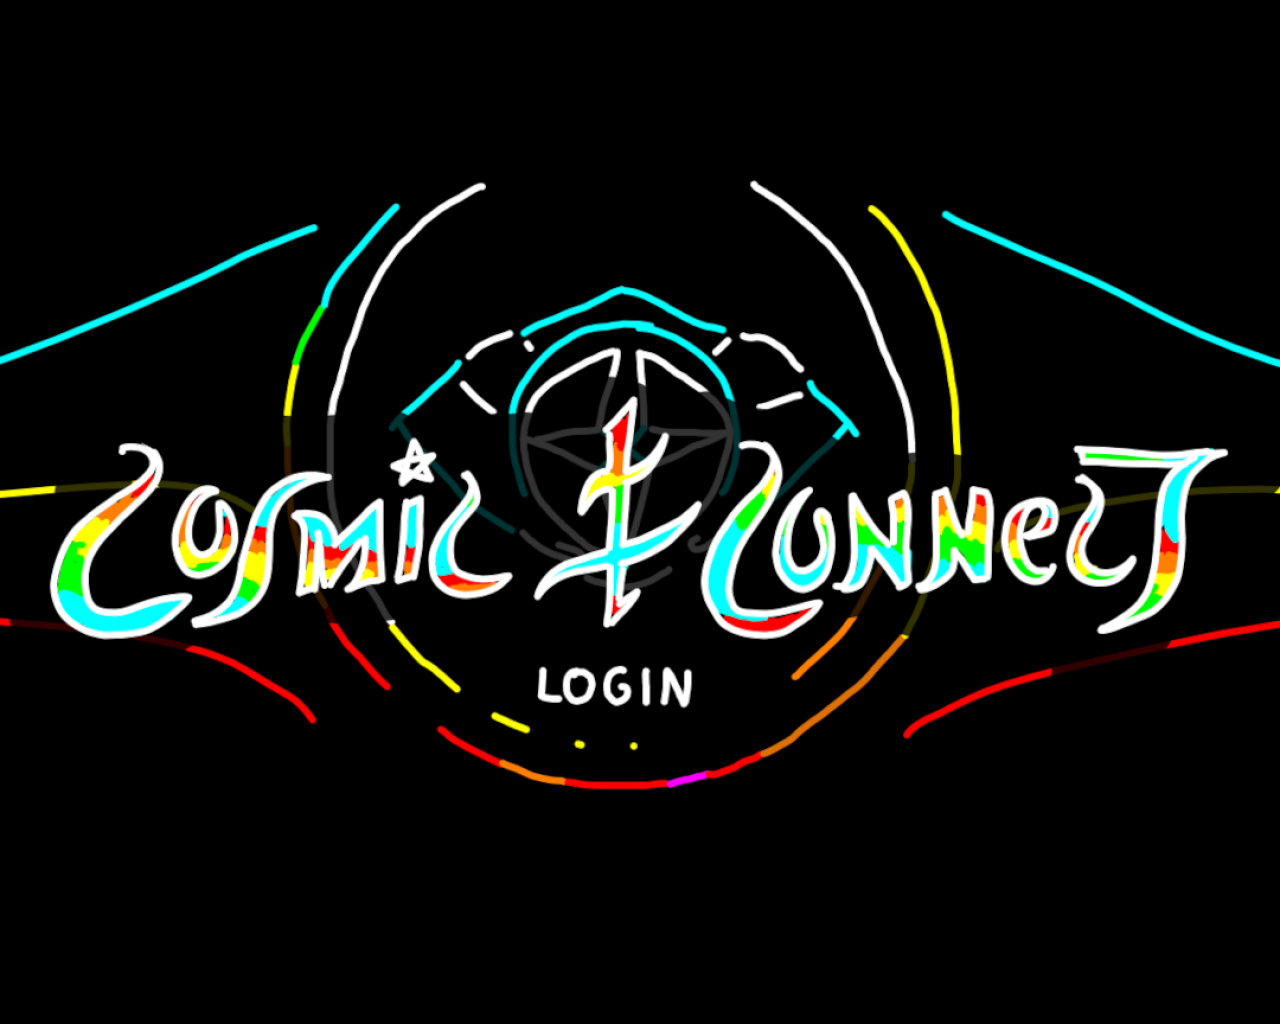 Poster Image for Cosmic Connect